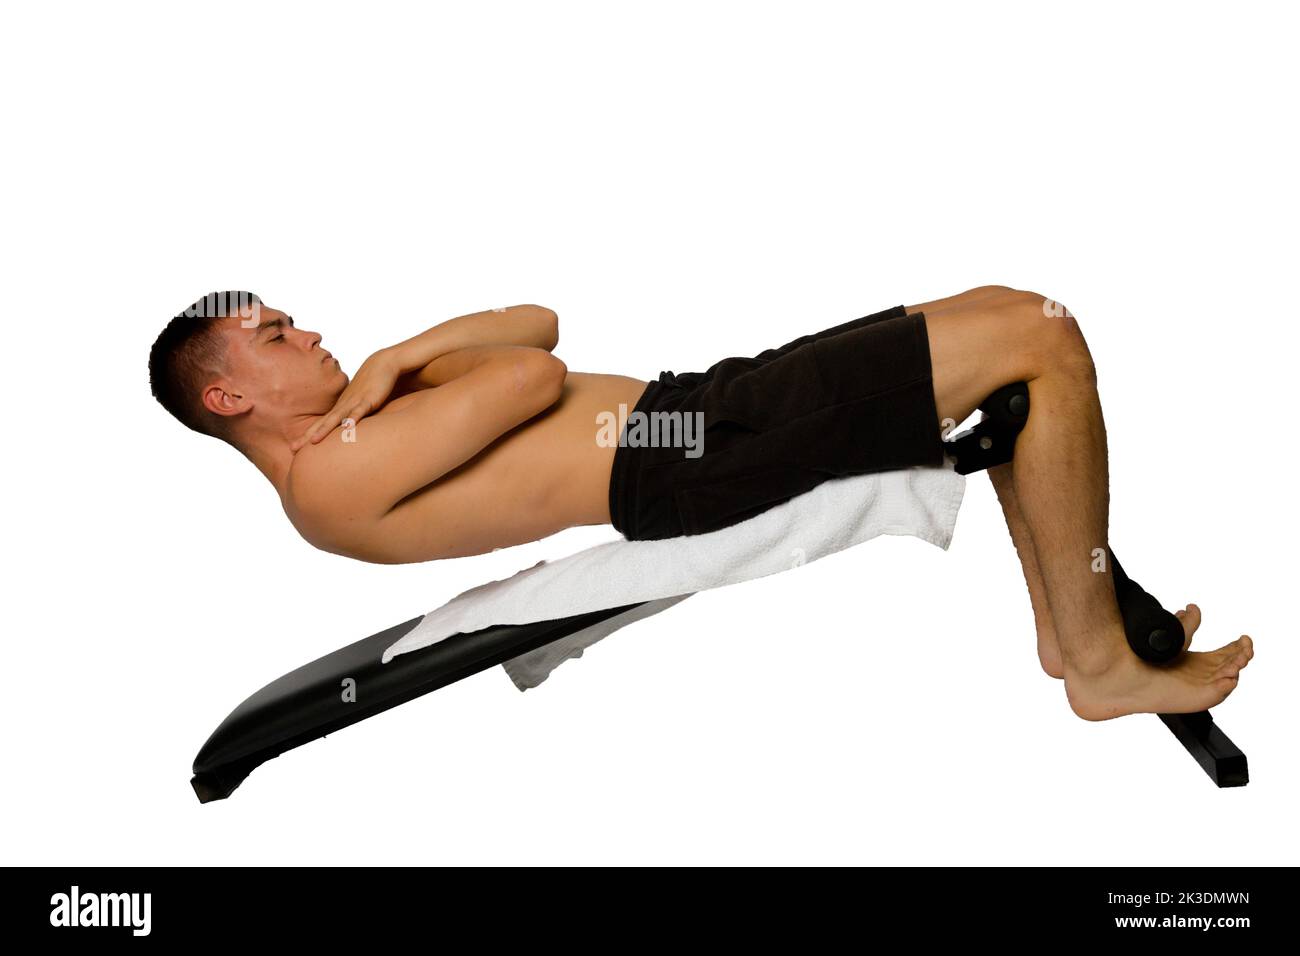 Shirtless 19 year old teenage boy doing sit ups on an exercise bench Stock Photo